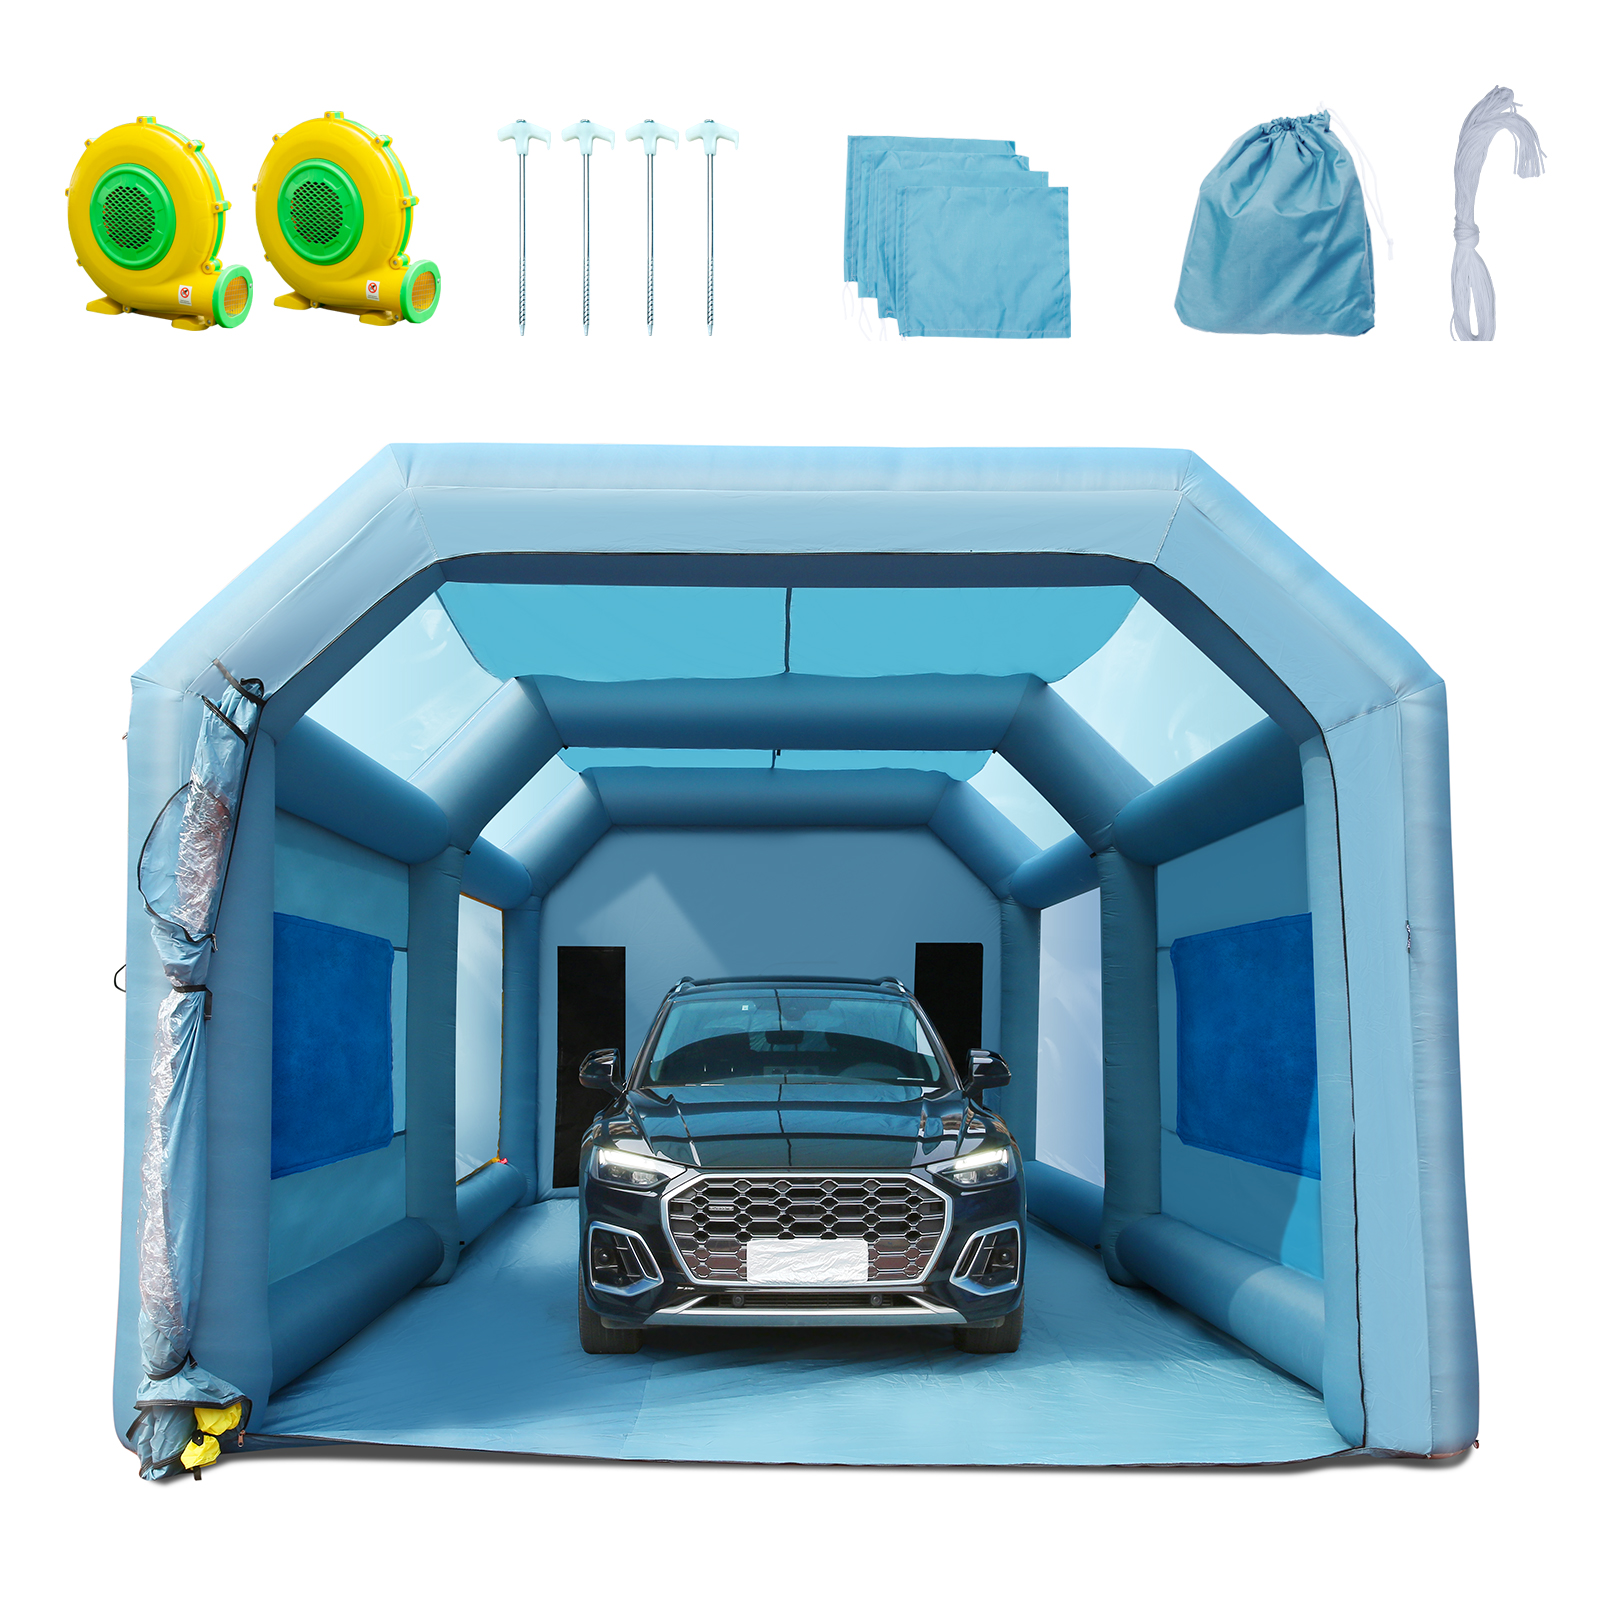 Paint Spray Tent,Spray Shelter,Spray Paint Booth